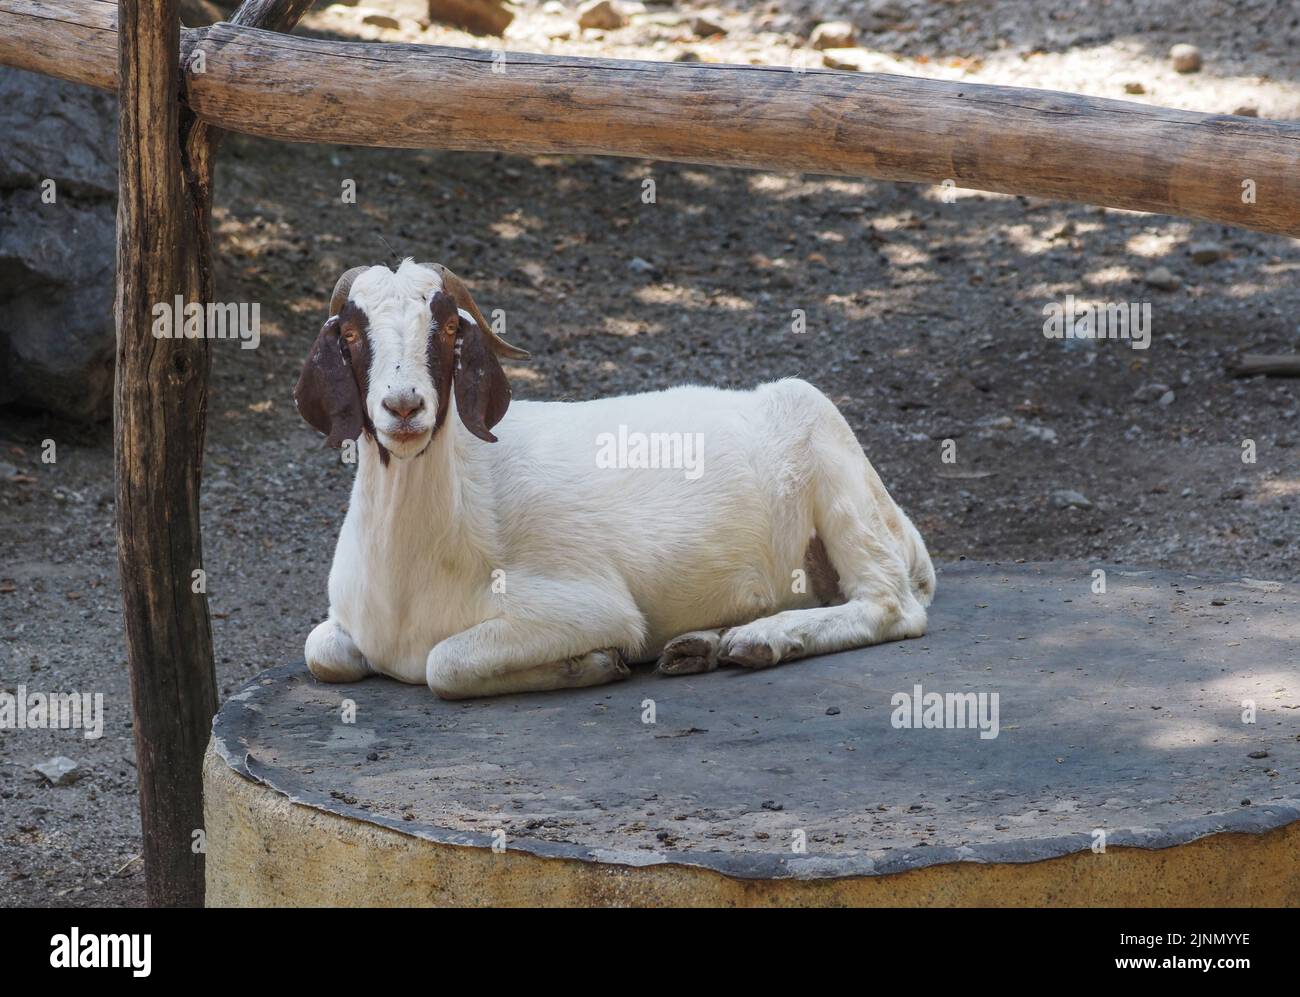 A white goat lies in an enclosure at the Salzburg Zoo Stock Photo